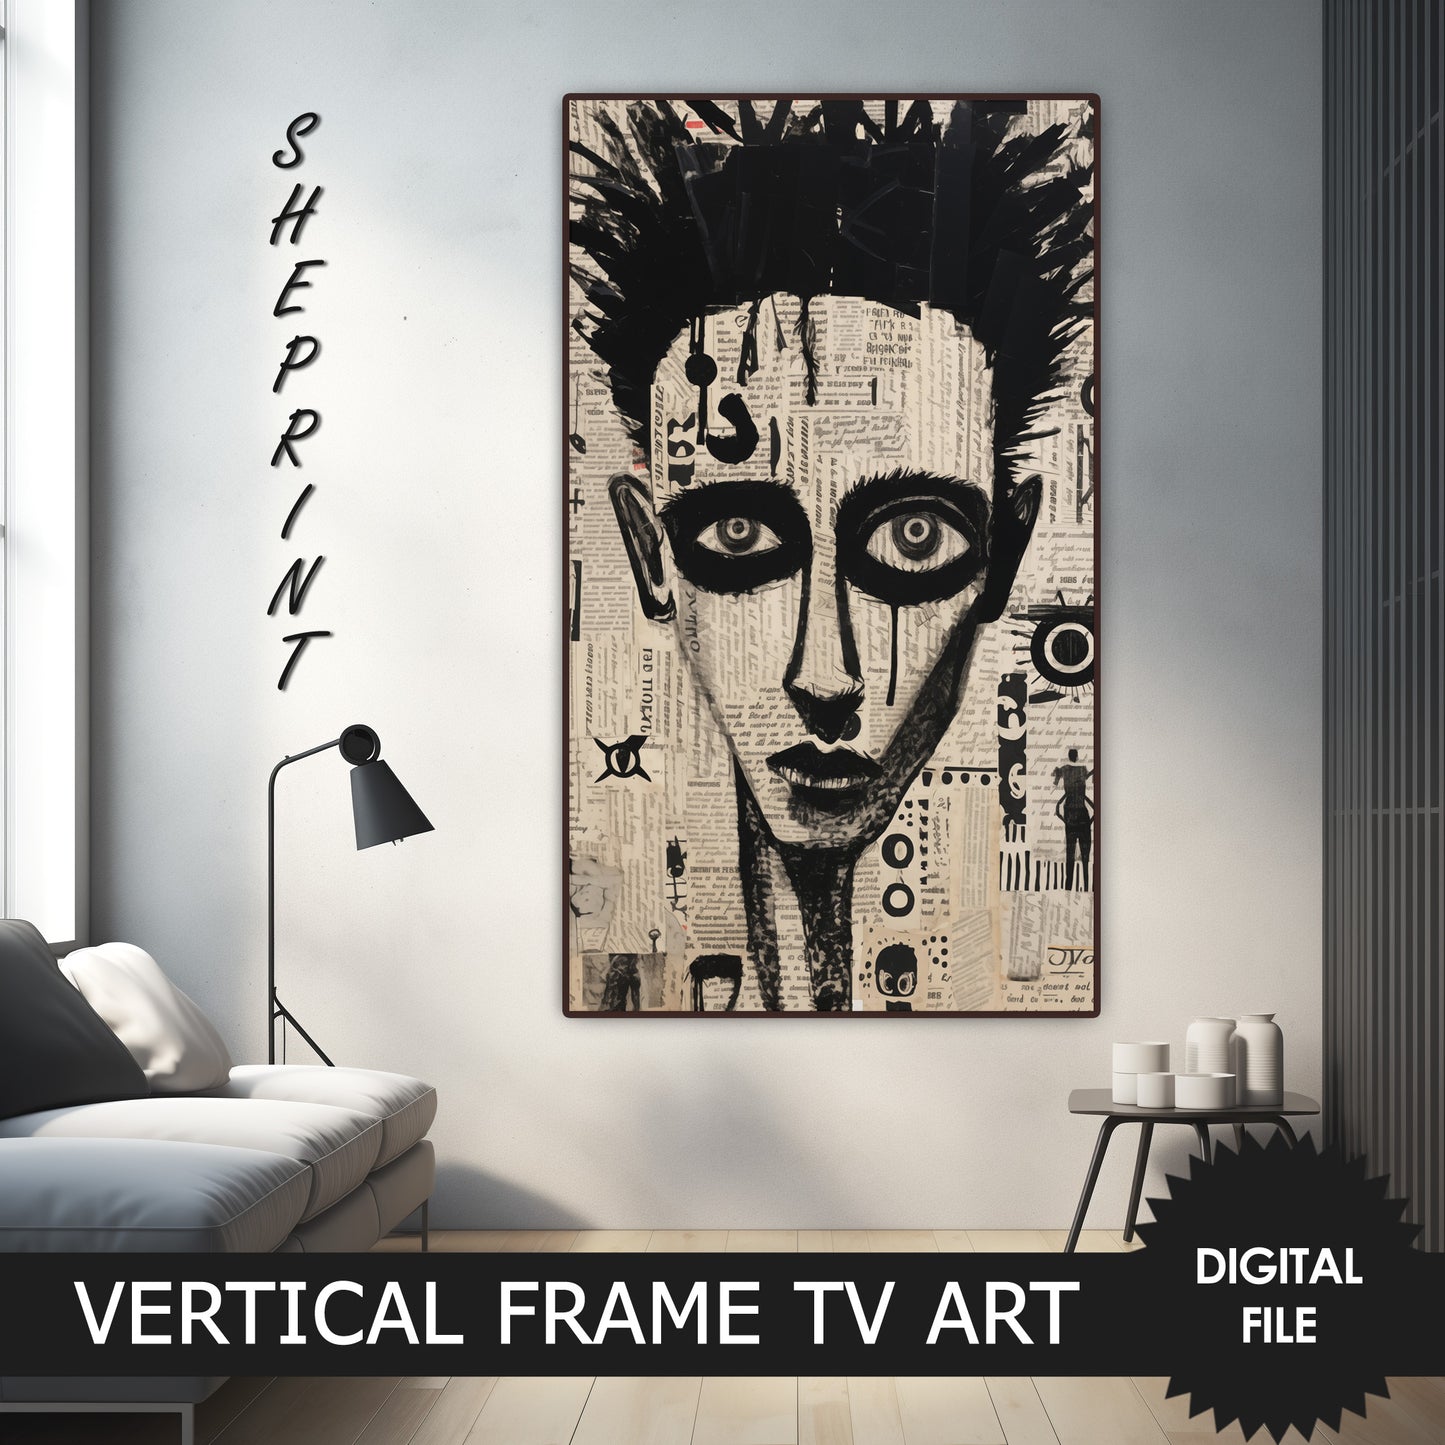 Vertical Frame TV Art, Raw Art Brut Collage Face, Outsider Art preview on Samsung Frame Tv when mounted vertically